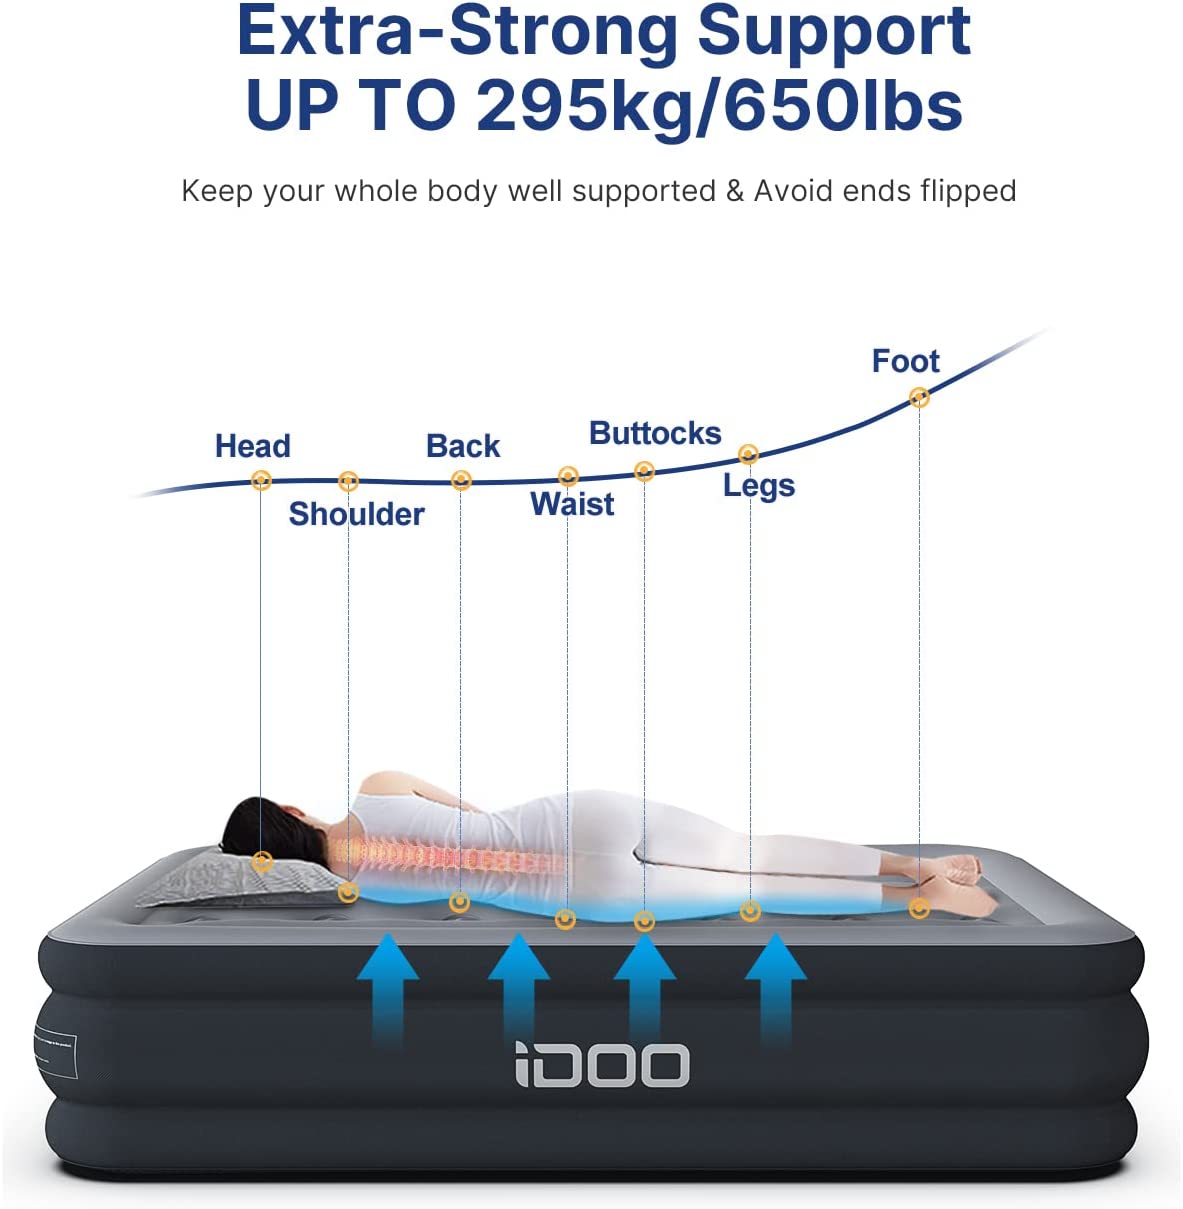 iDOO Double size Air Bed, Inflatable bed with Built-in Pump